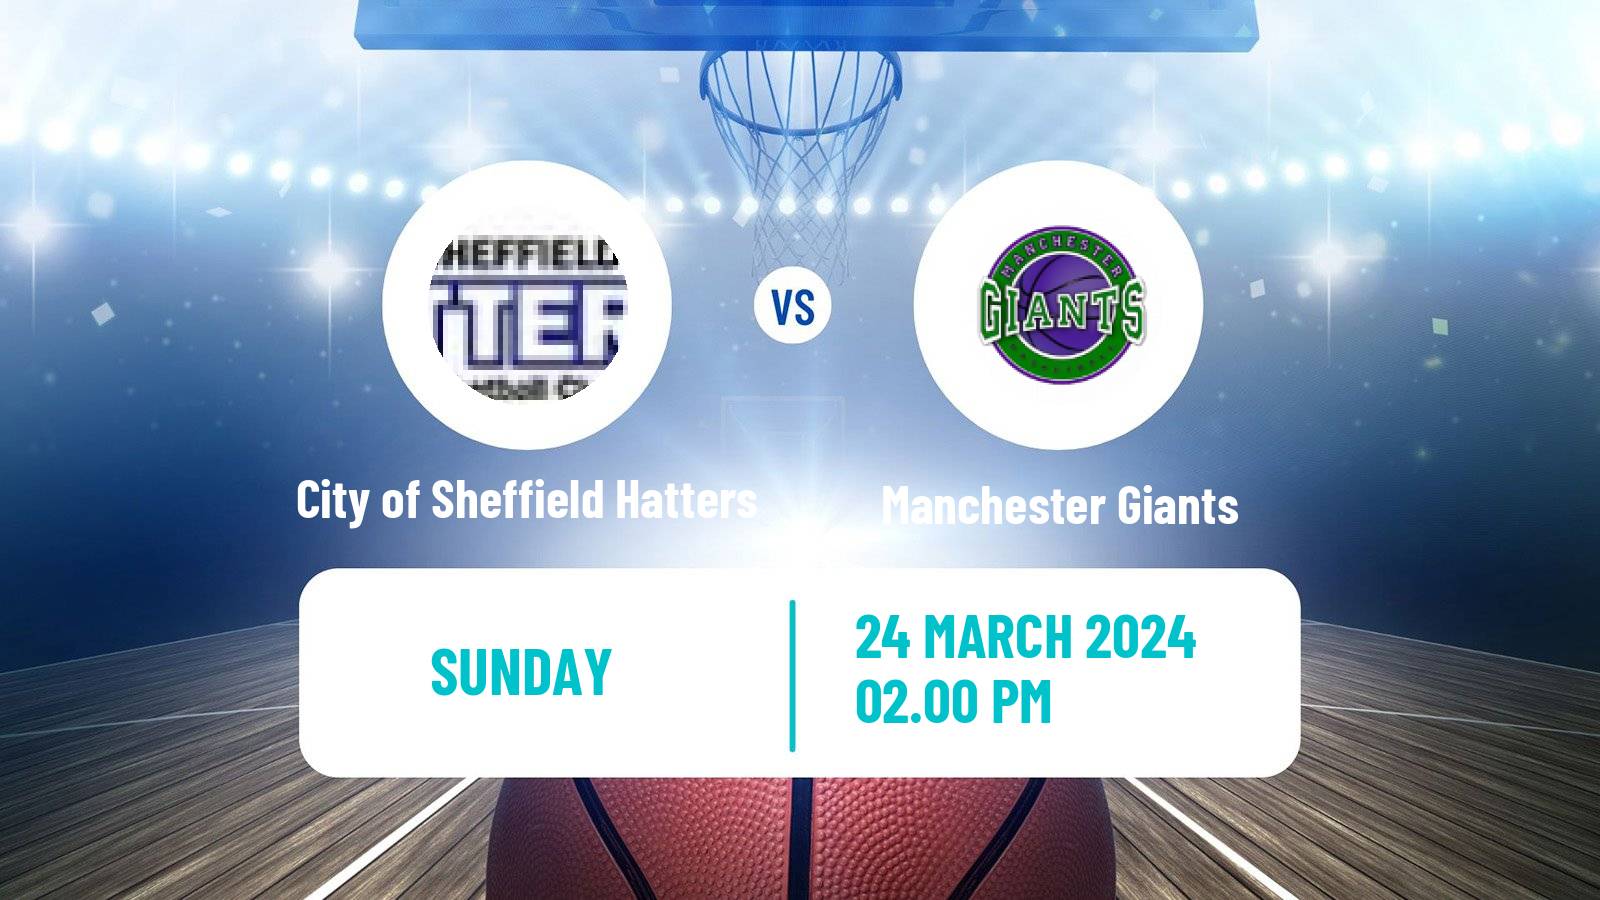 Basketball British WBBL City of Sheffield Hatters - Manchester Giants